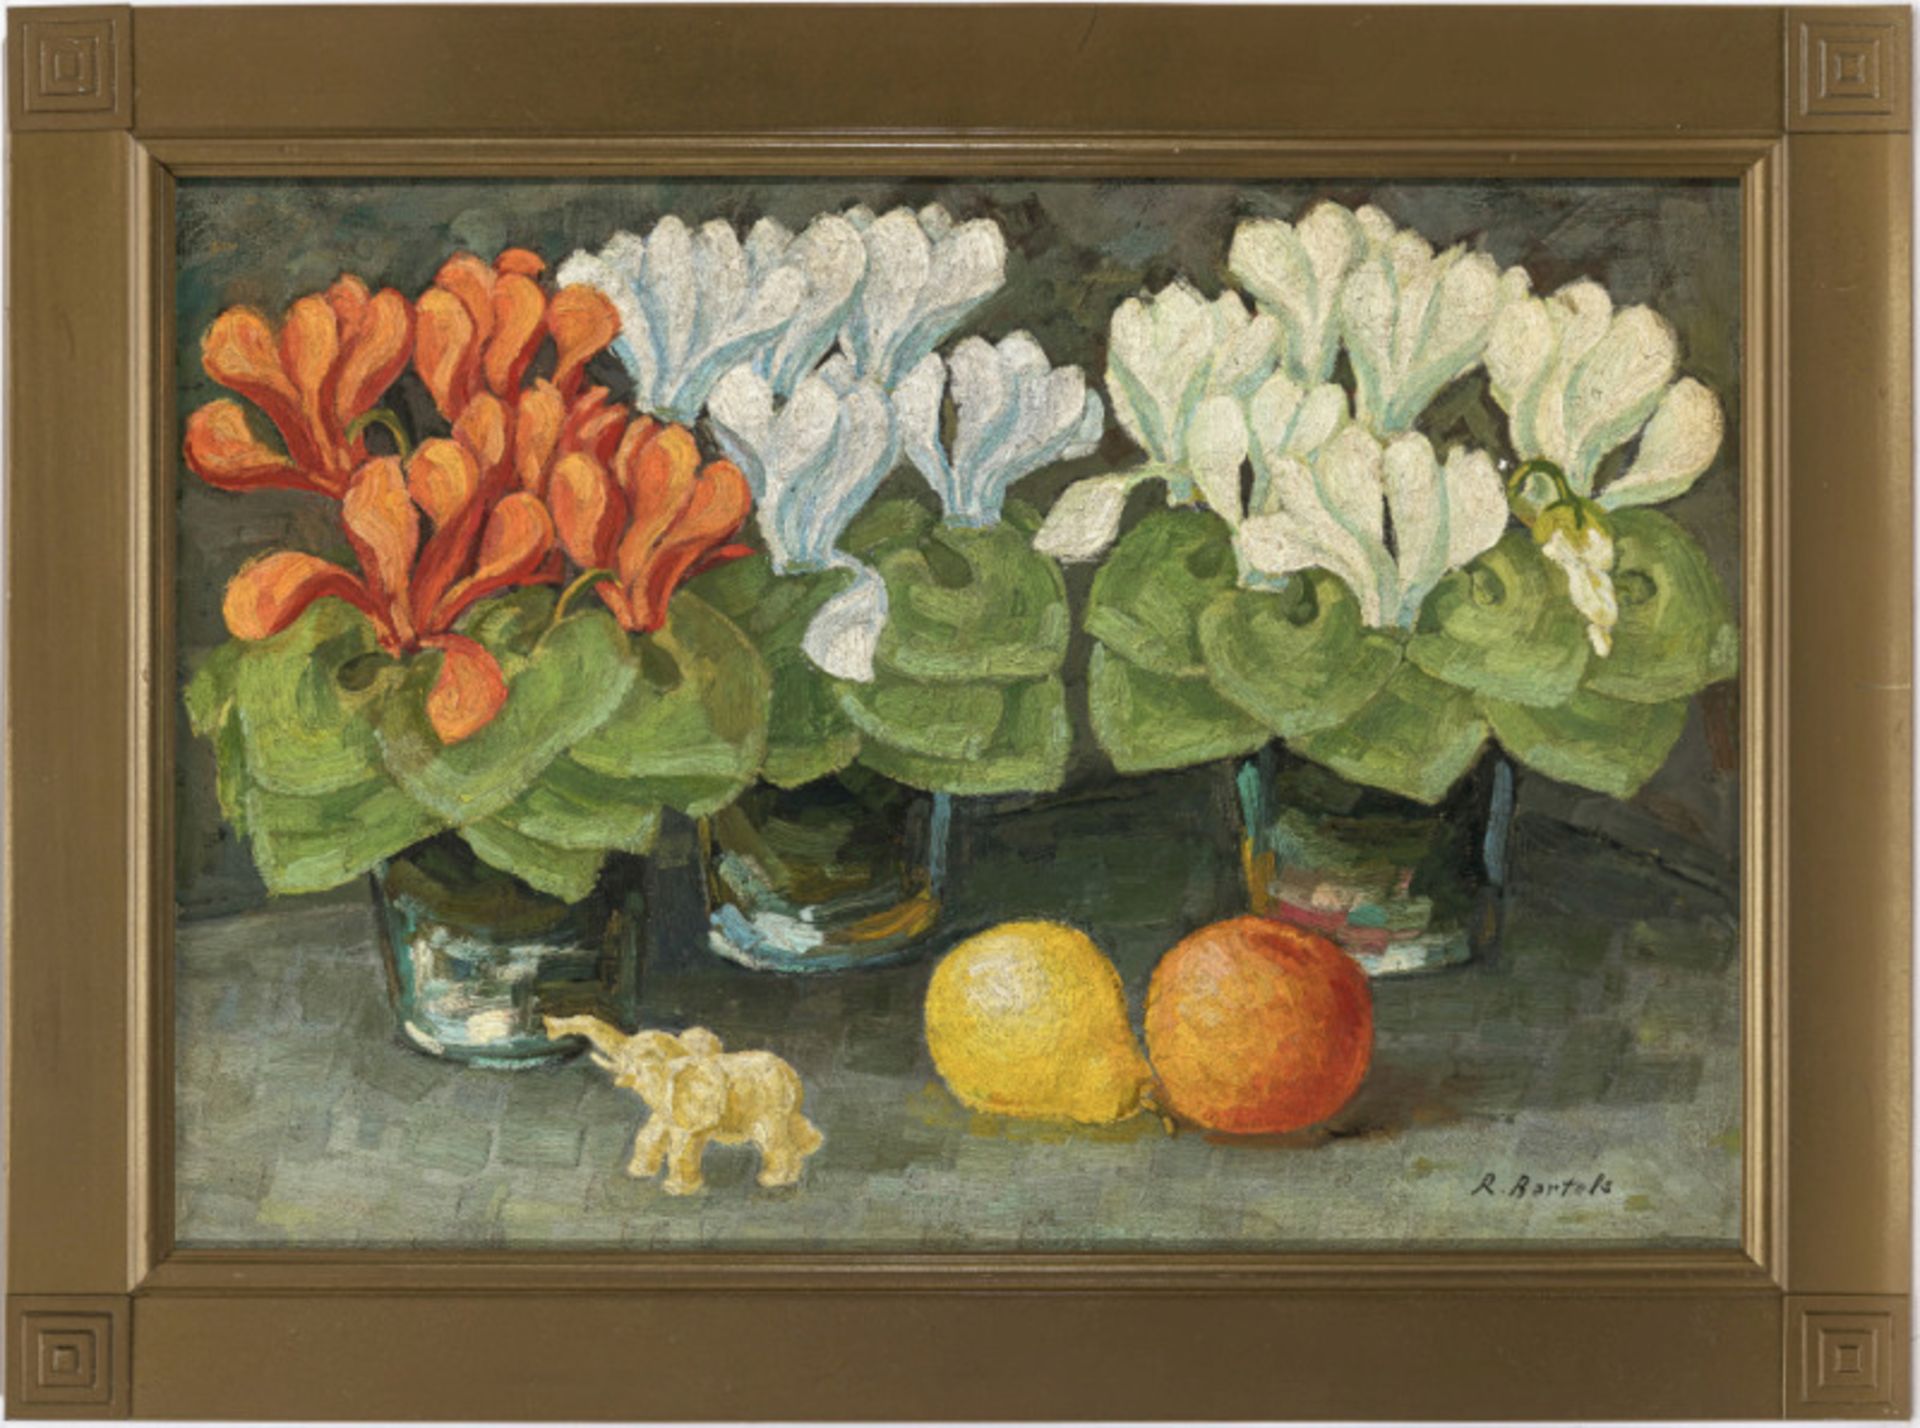 Rudolf Bartels - Still life with cyclamen, citrus fruits and a figure of an elephant - Image 2 of 3